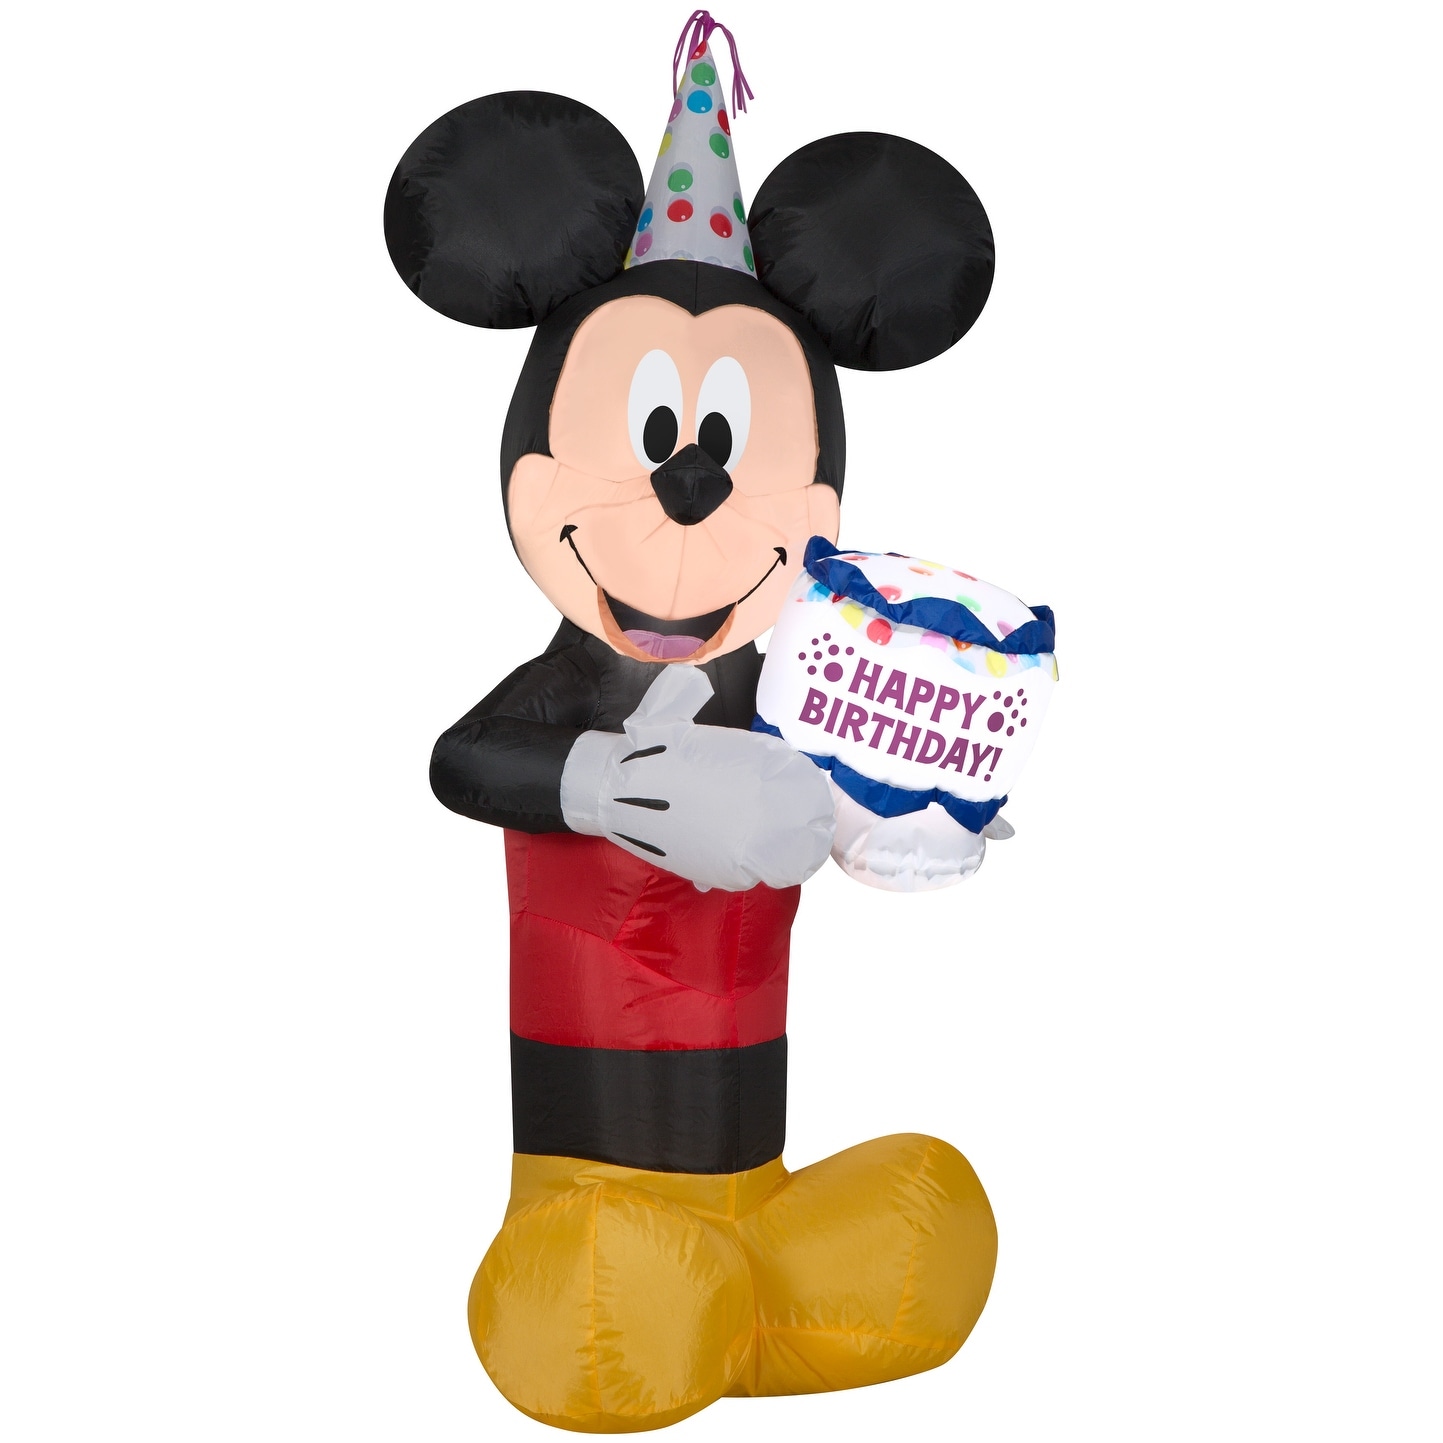 Gemmy Airblown Inflatable Birthday Party Mickey Mouse with Cake, 3.5 ft Tall, black - 42.13x17.72x20.47